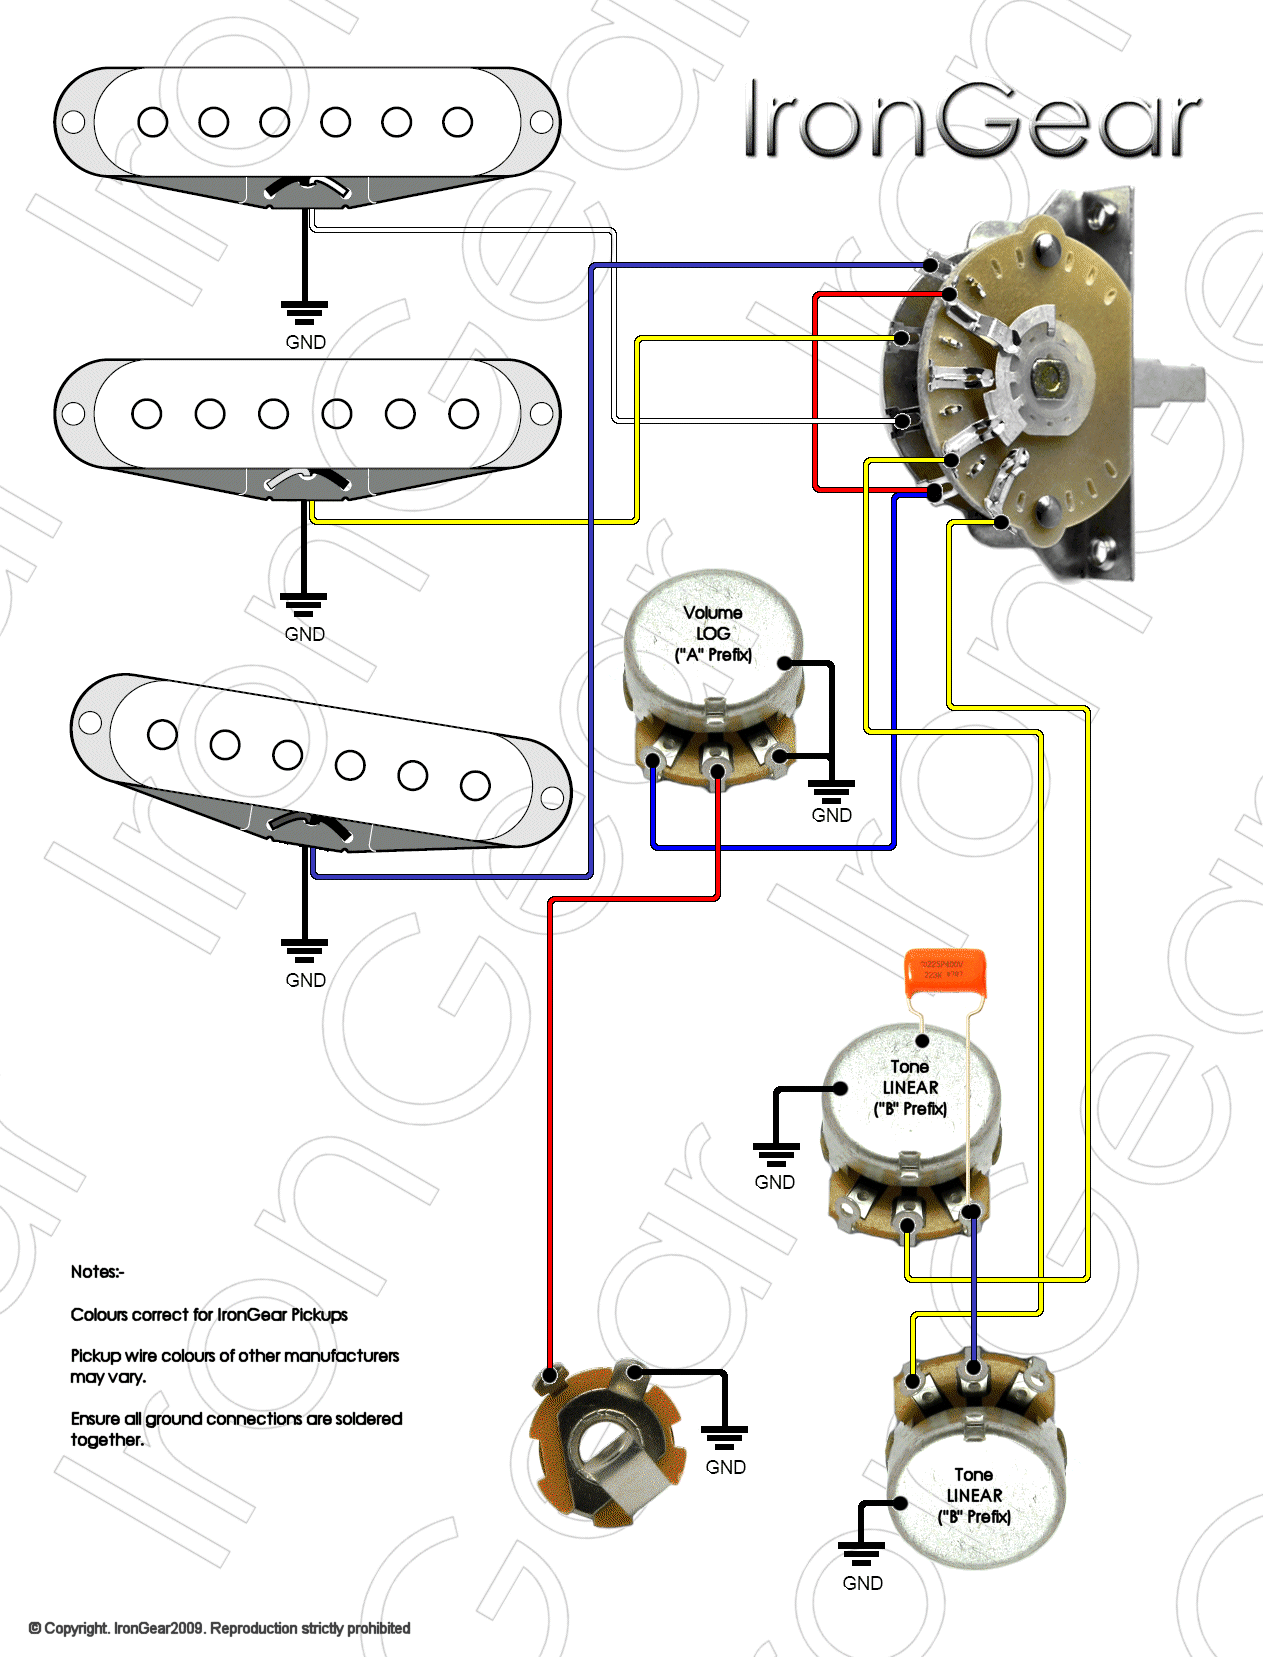 Wiring Diagram "3 Position Switch" Strat Import from www.axetec.co.uk